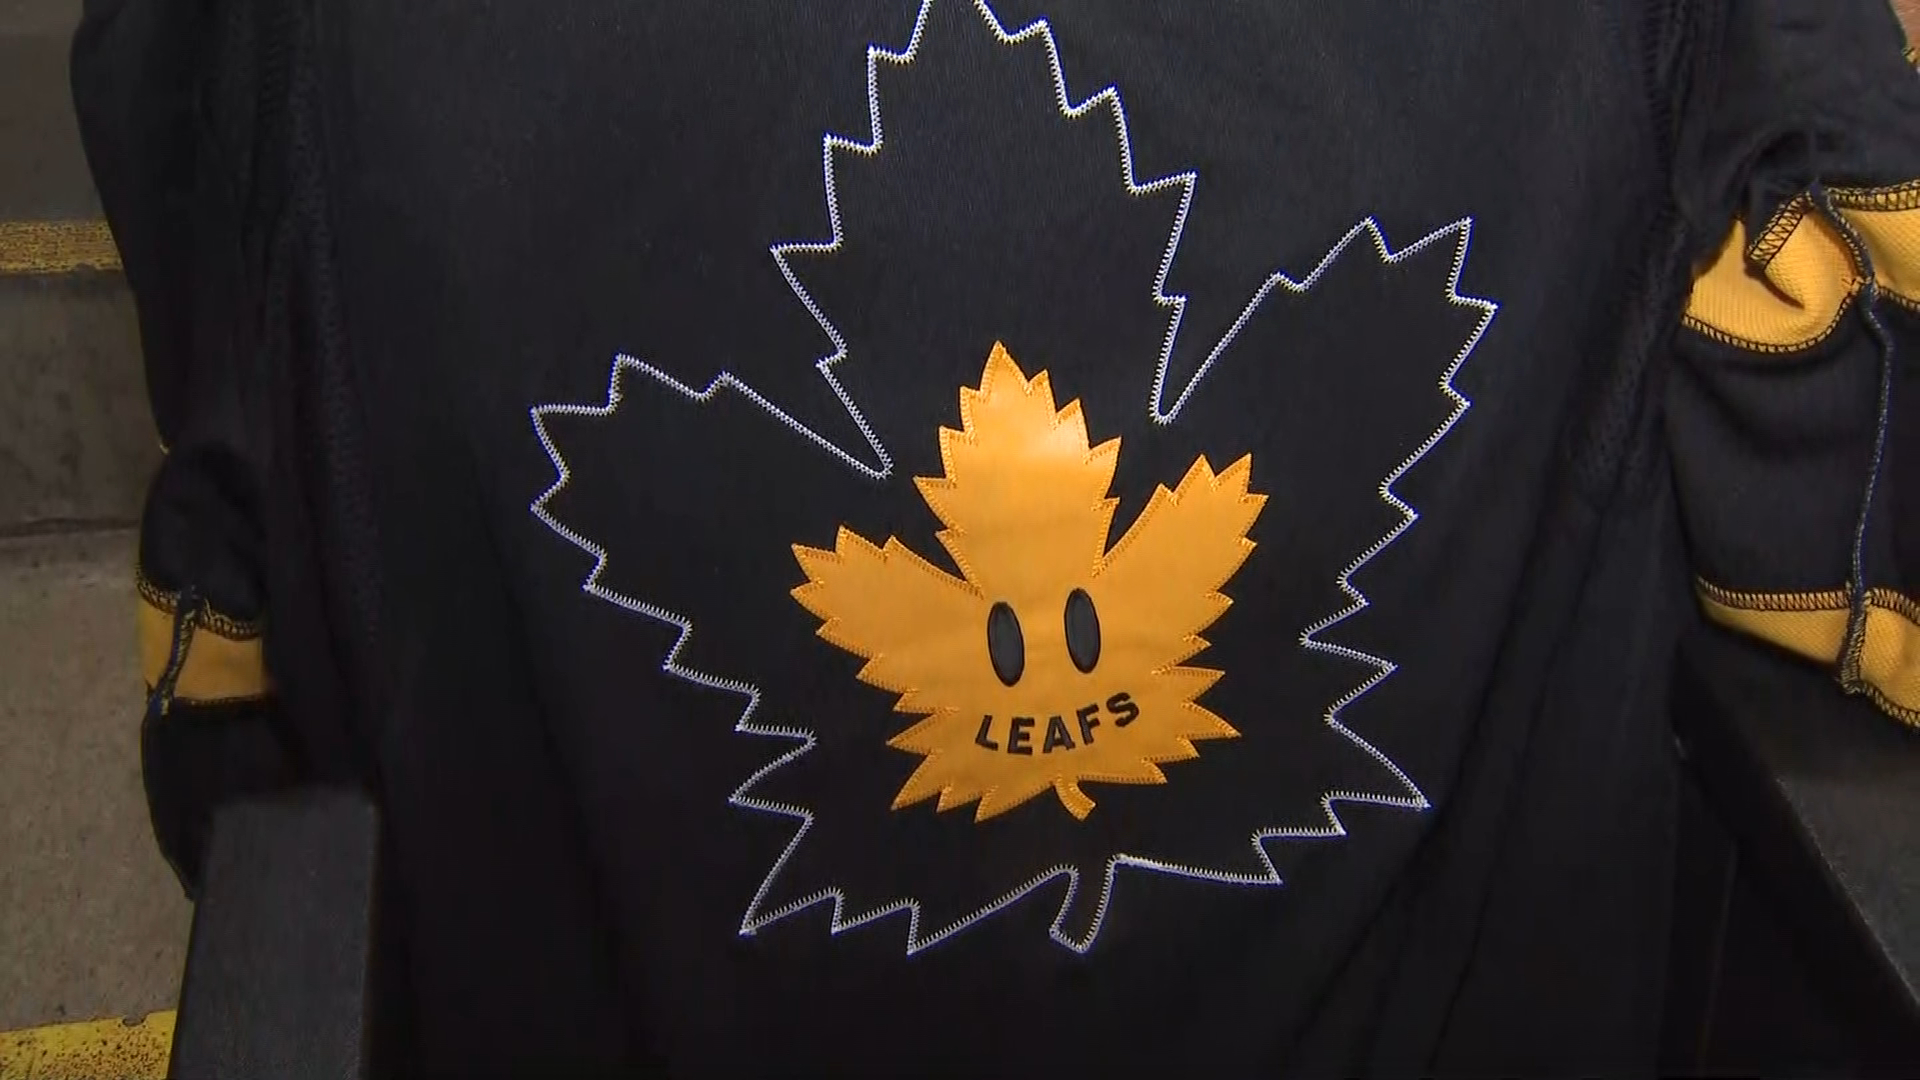 Reviewing The Justin Bieber And Maple Leafs New Jersey 